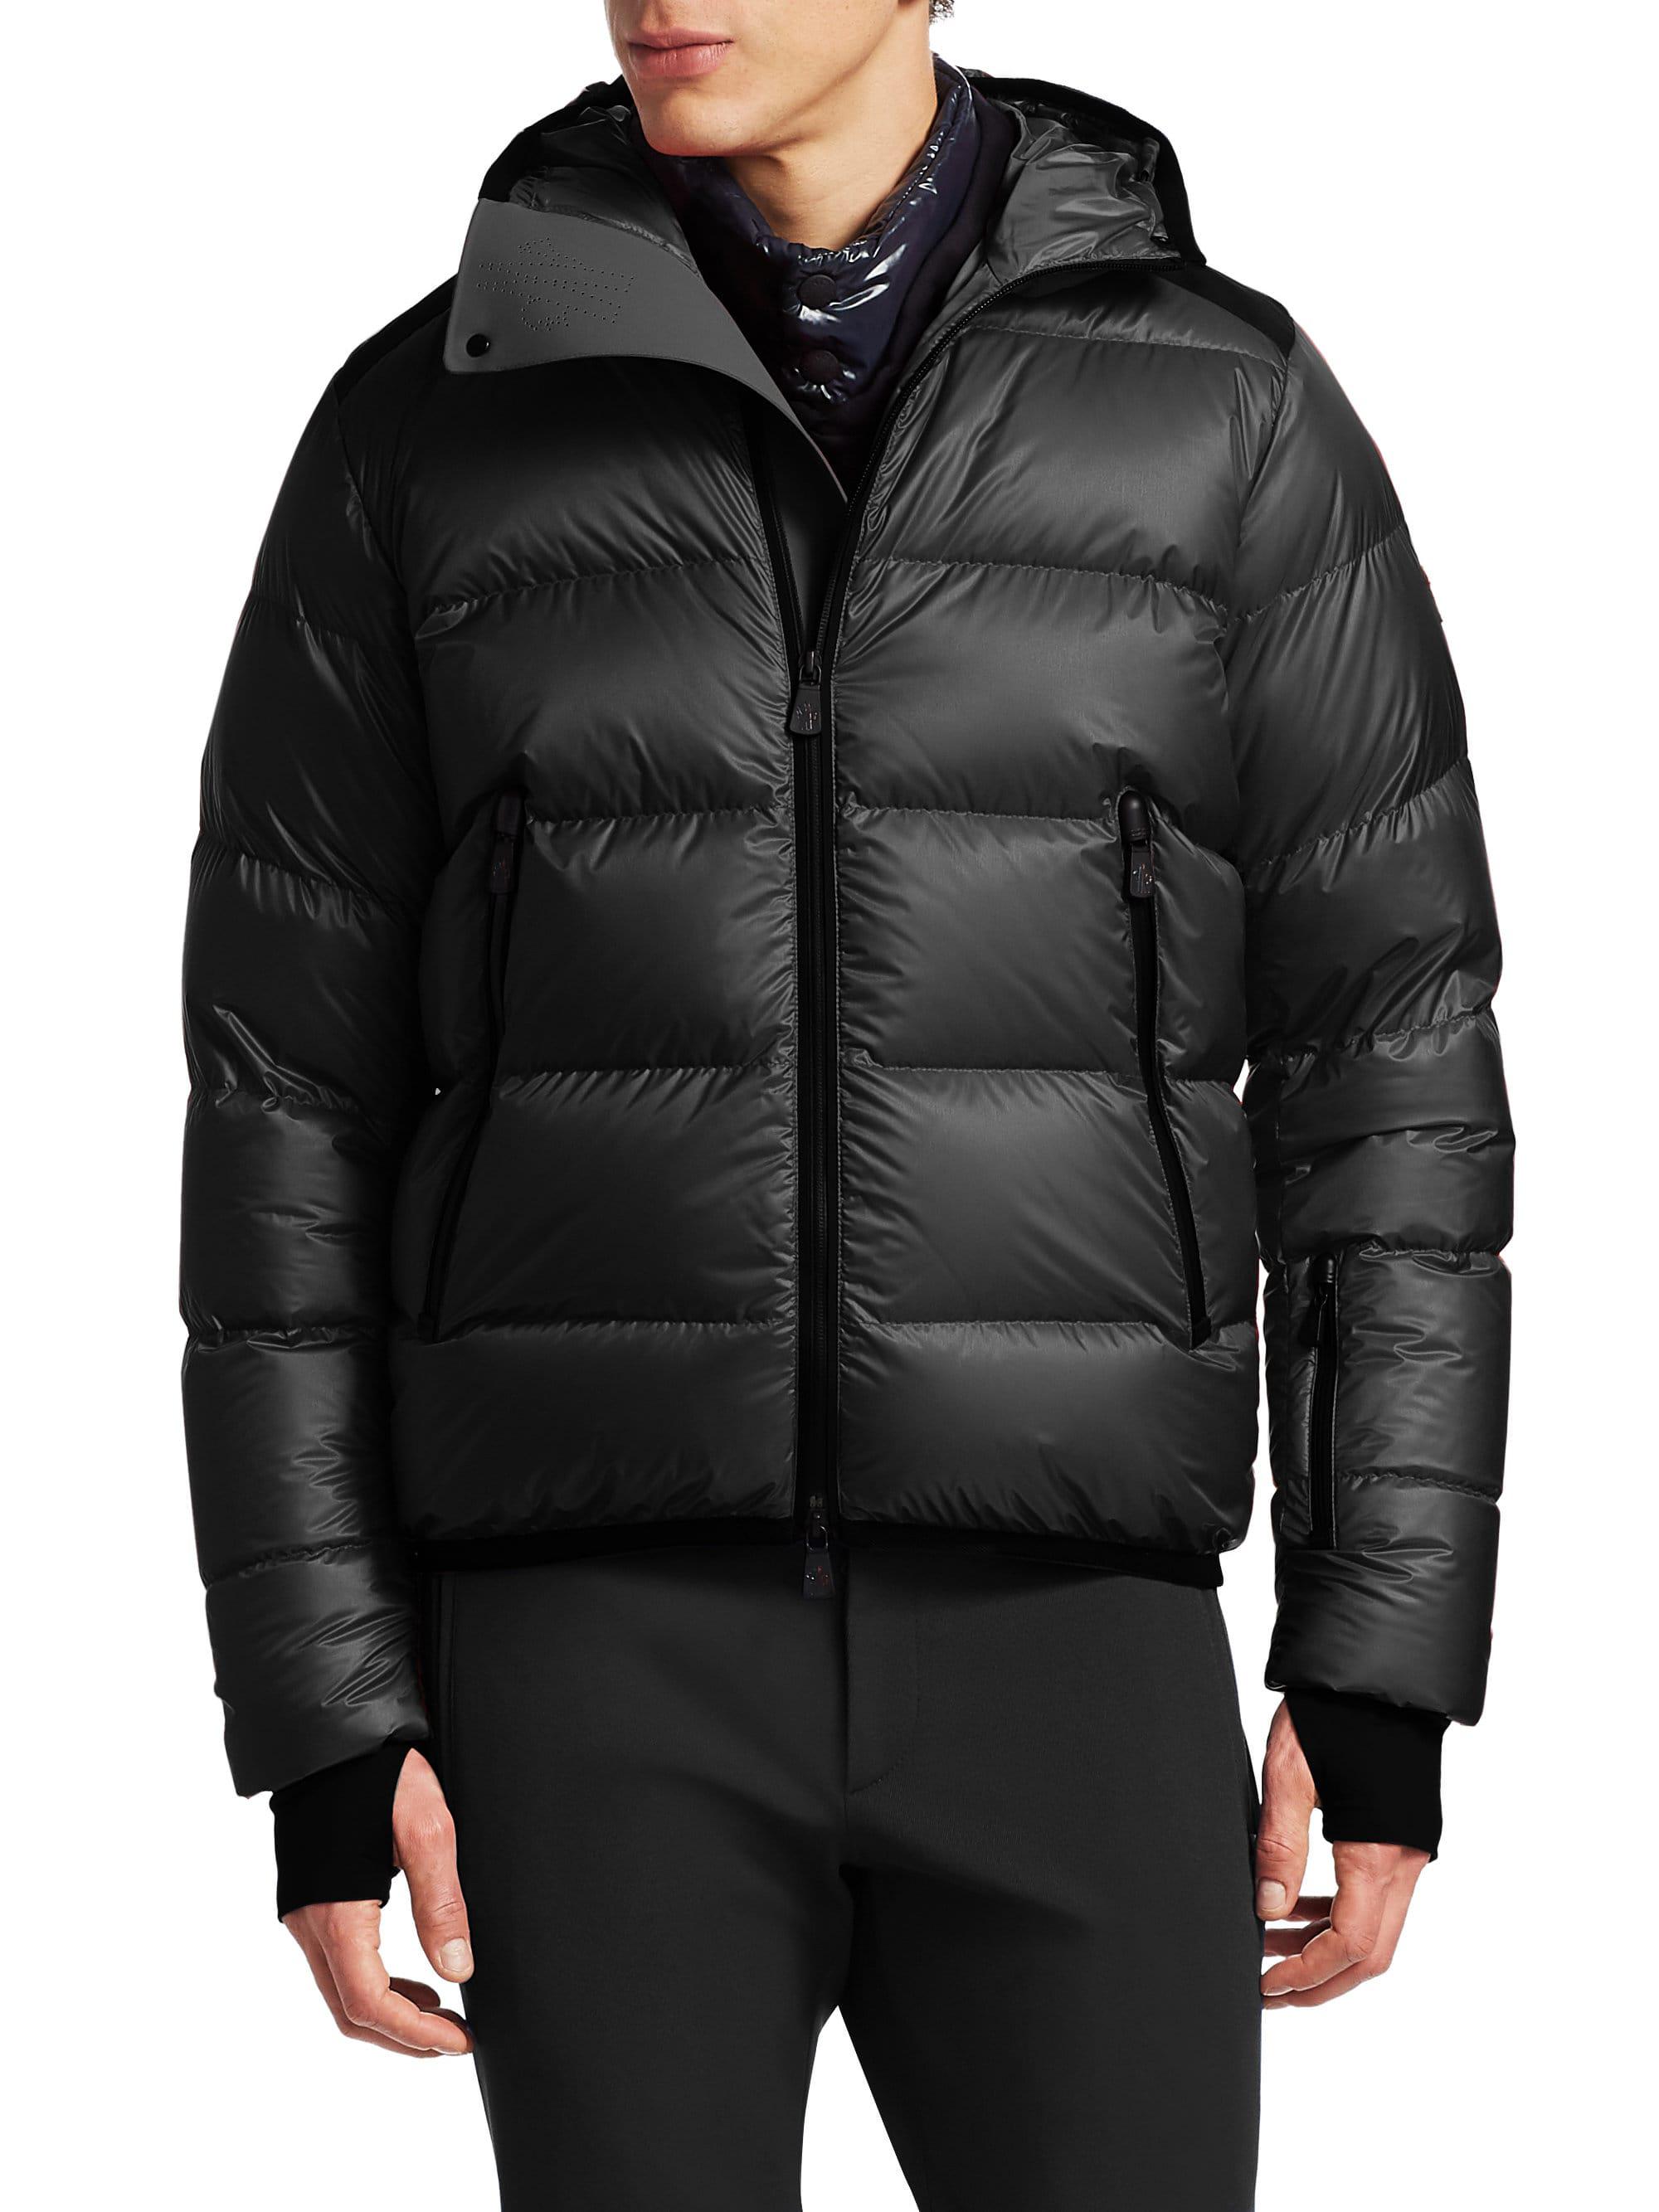 Moncler Synthetic Hooded Puffer Jacket in Black for Men - Lyst